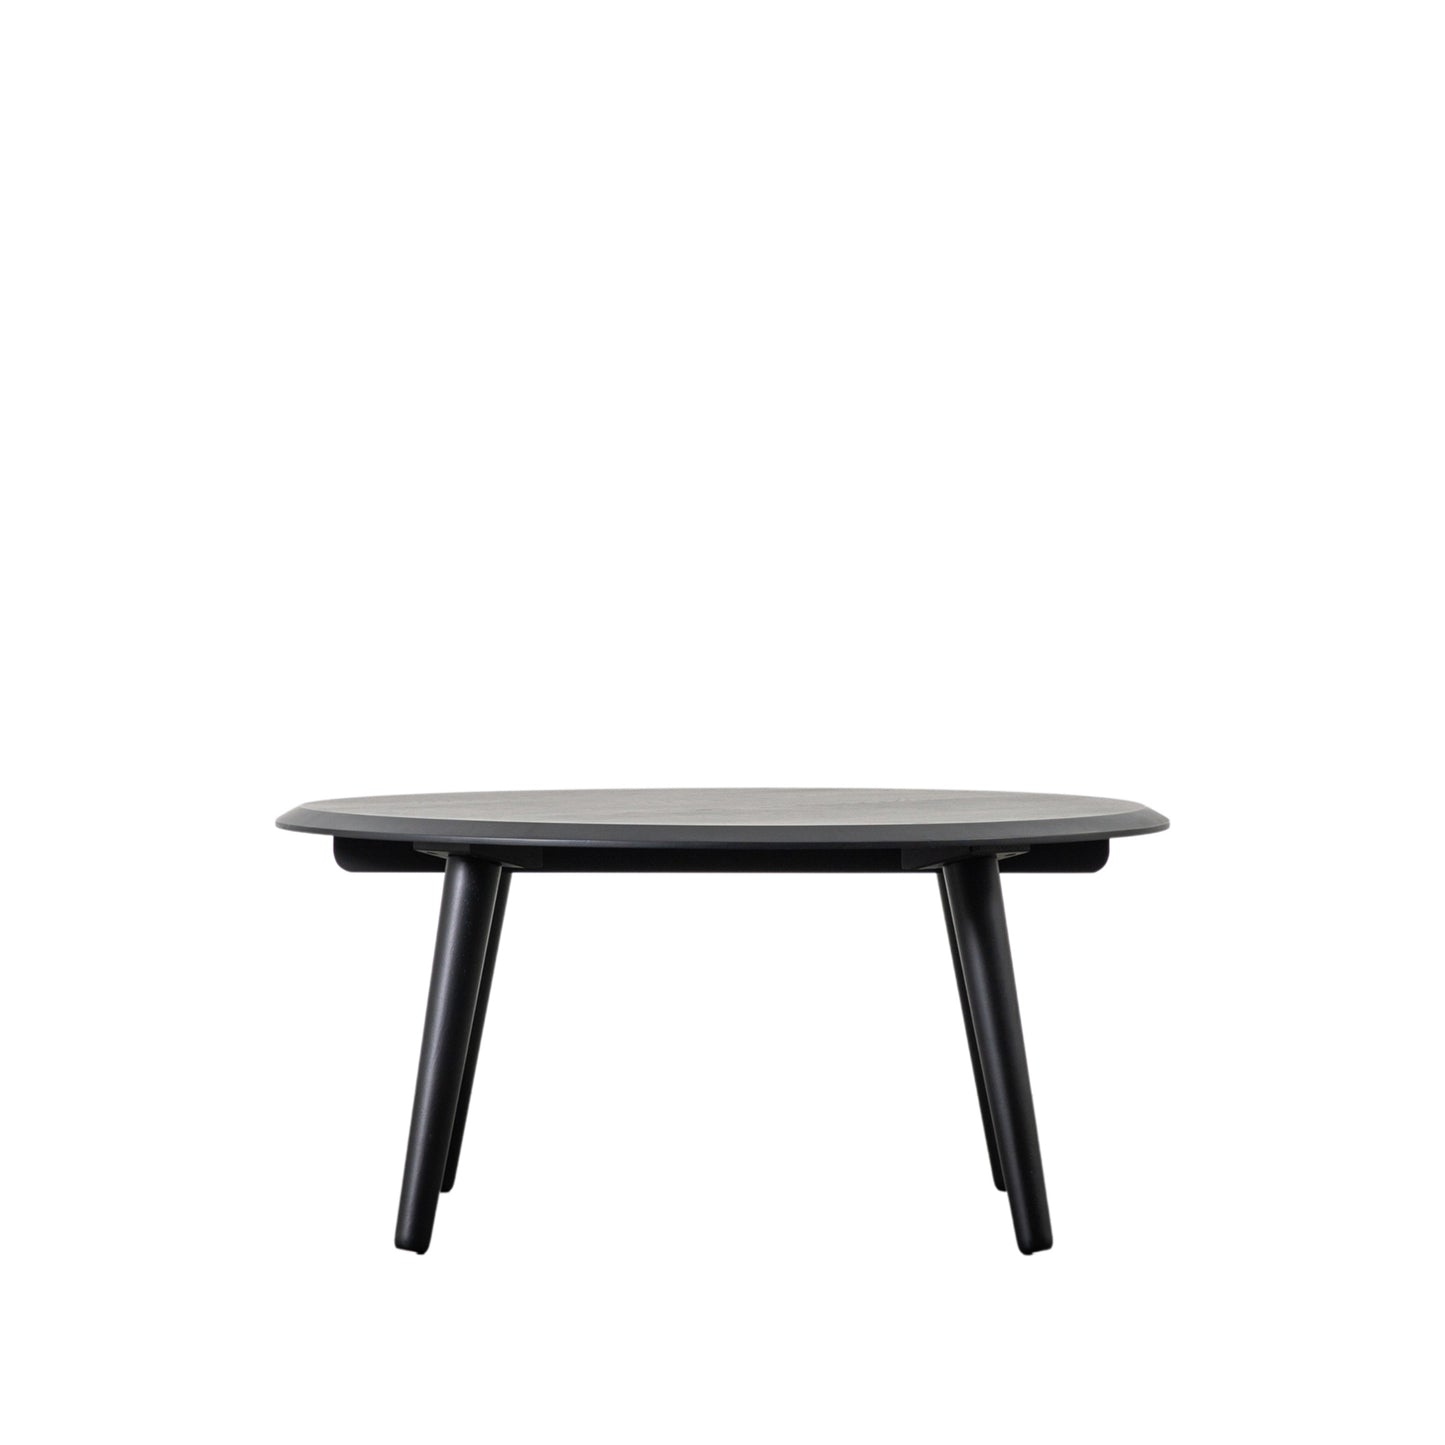 A home furniture piece - Maddox Coffee Table with black legs - blending perfectly in interior decor available on Kikiathome.co.uk.